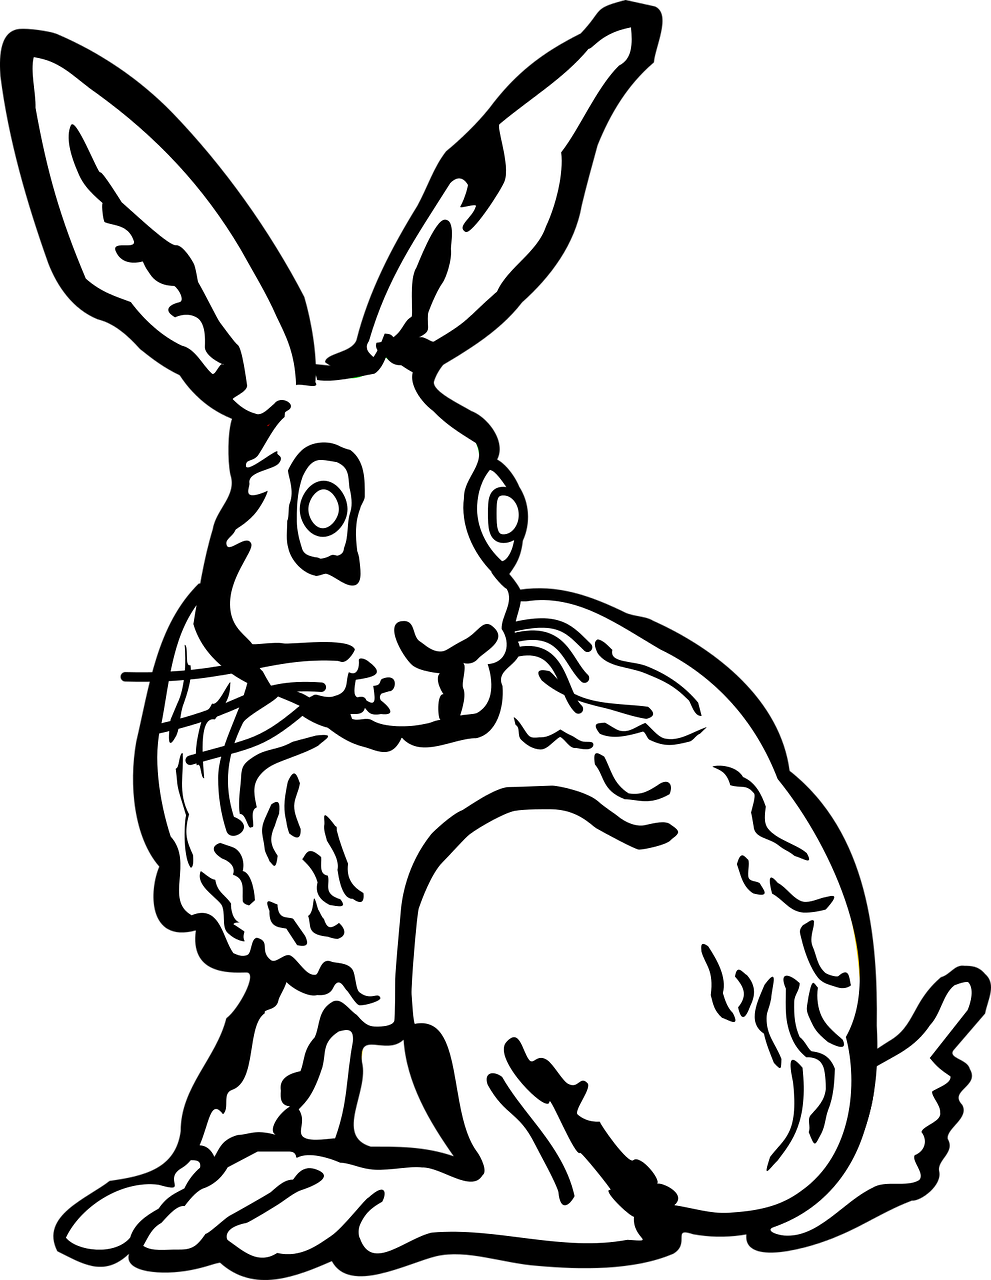 a black and white drawing of a rabbit, lineart, inspired by Sir John Tenniel, pixabay, ascii art, black backround. inkscape, vibrant high contrast coloring, looking threatening, everyone having fun